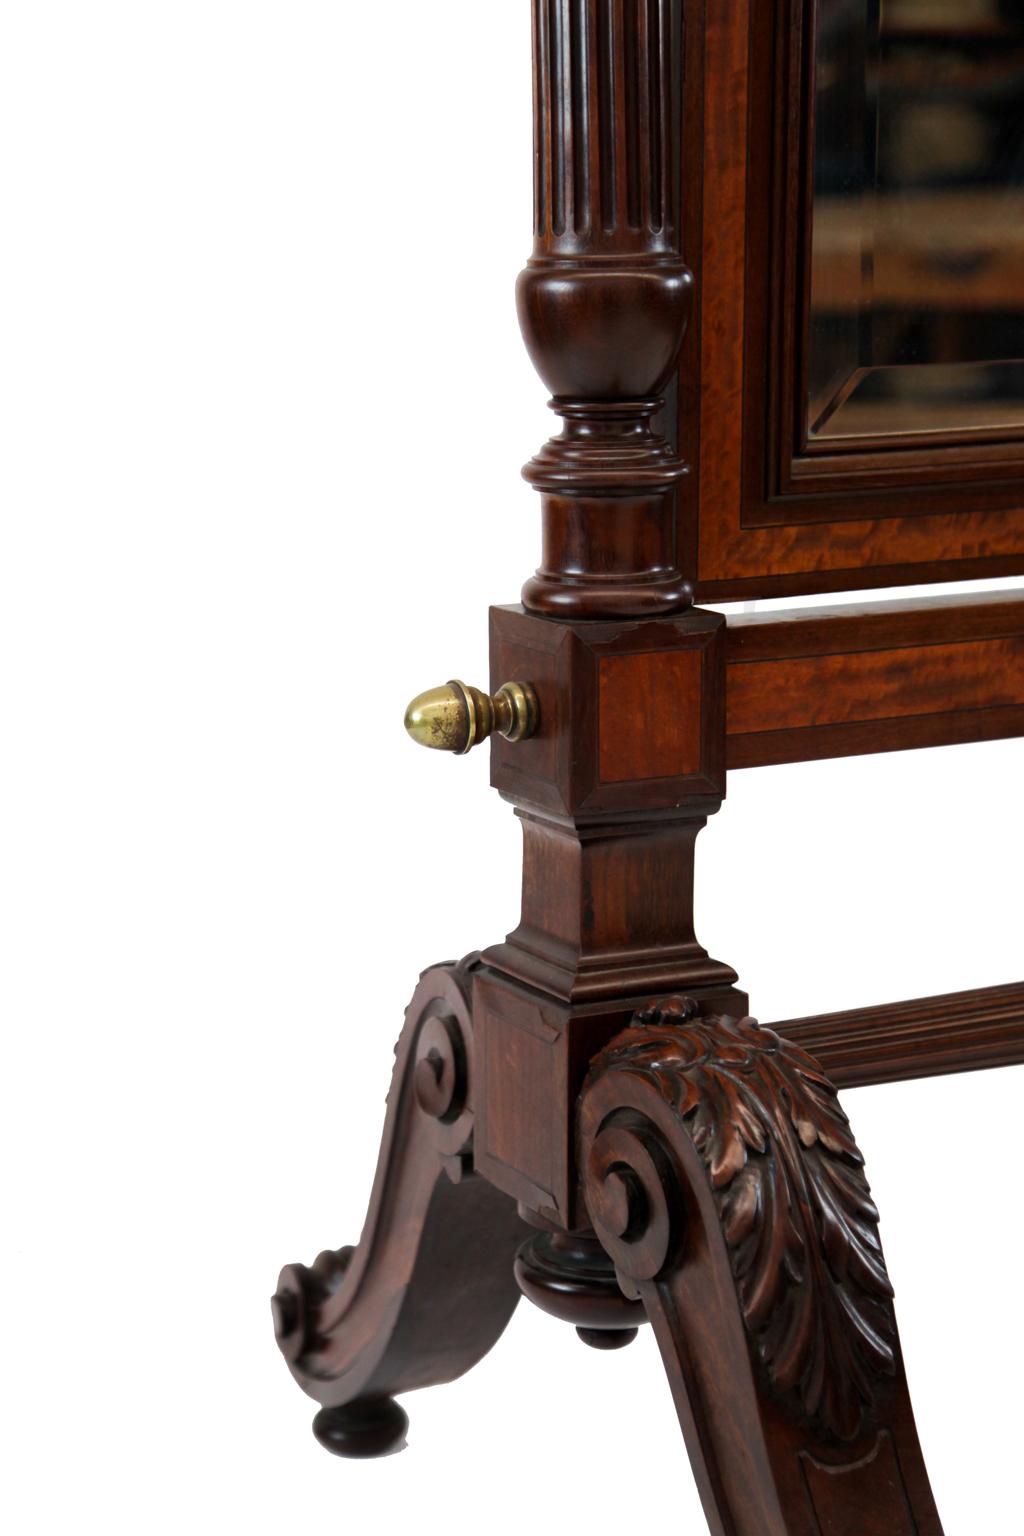 19th century English inlaid mahogany cheval mirror, the arched top rail with center applied crest, inlaid with satinwood and ebony, the turned and fluted stiles above acanthus carved legs terminating with scrolled feet connected with fluted and